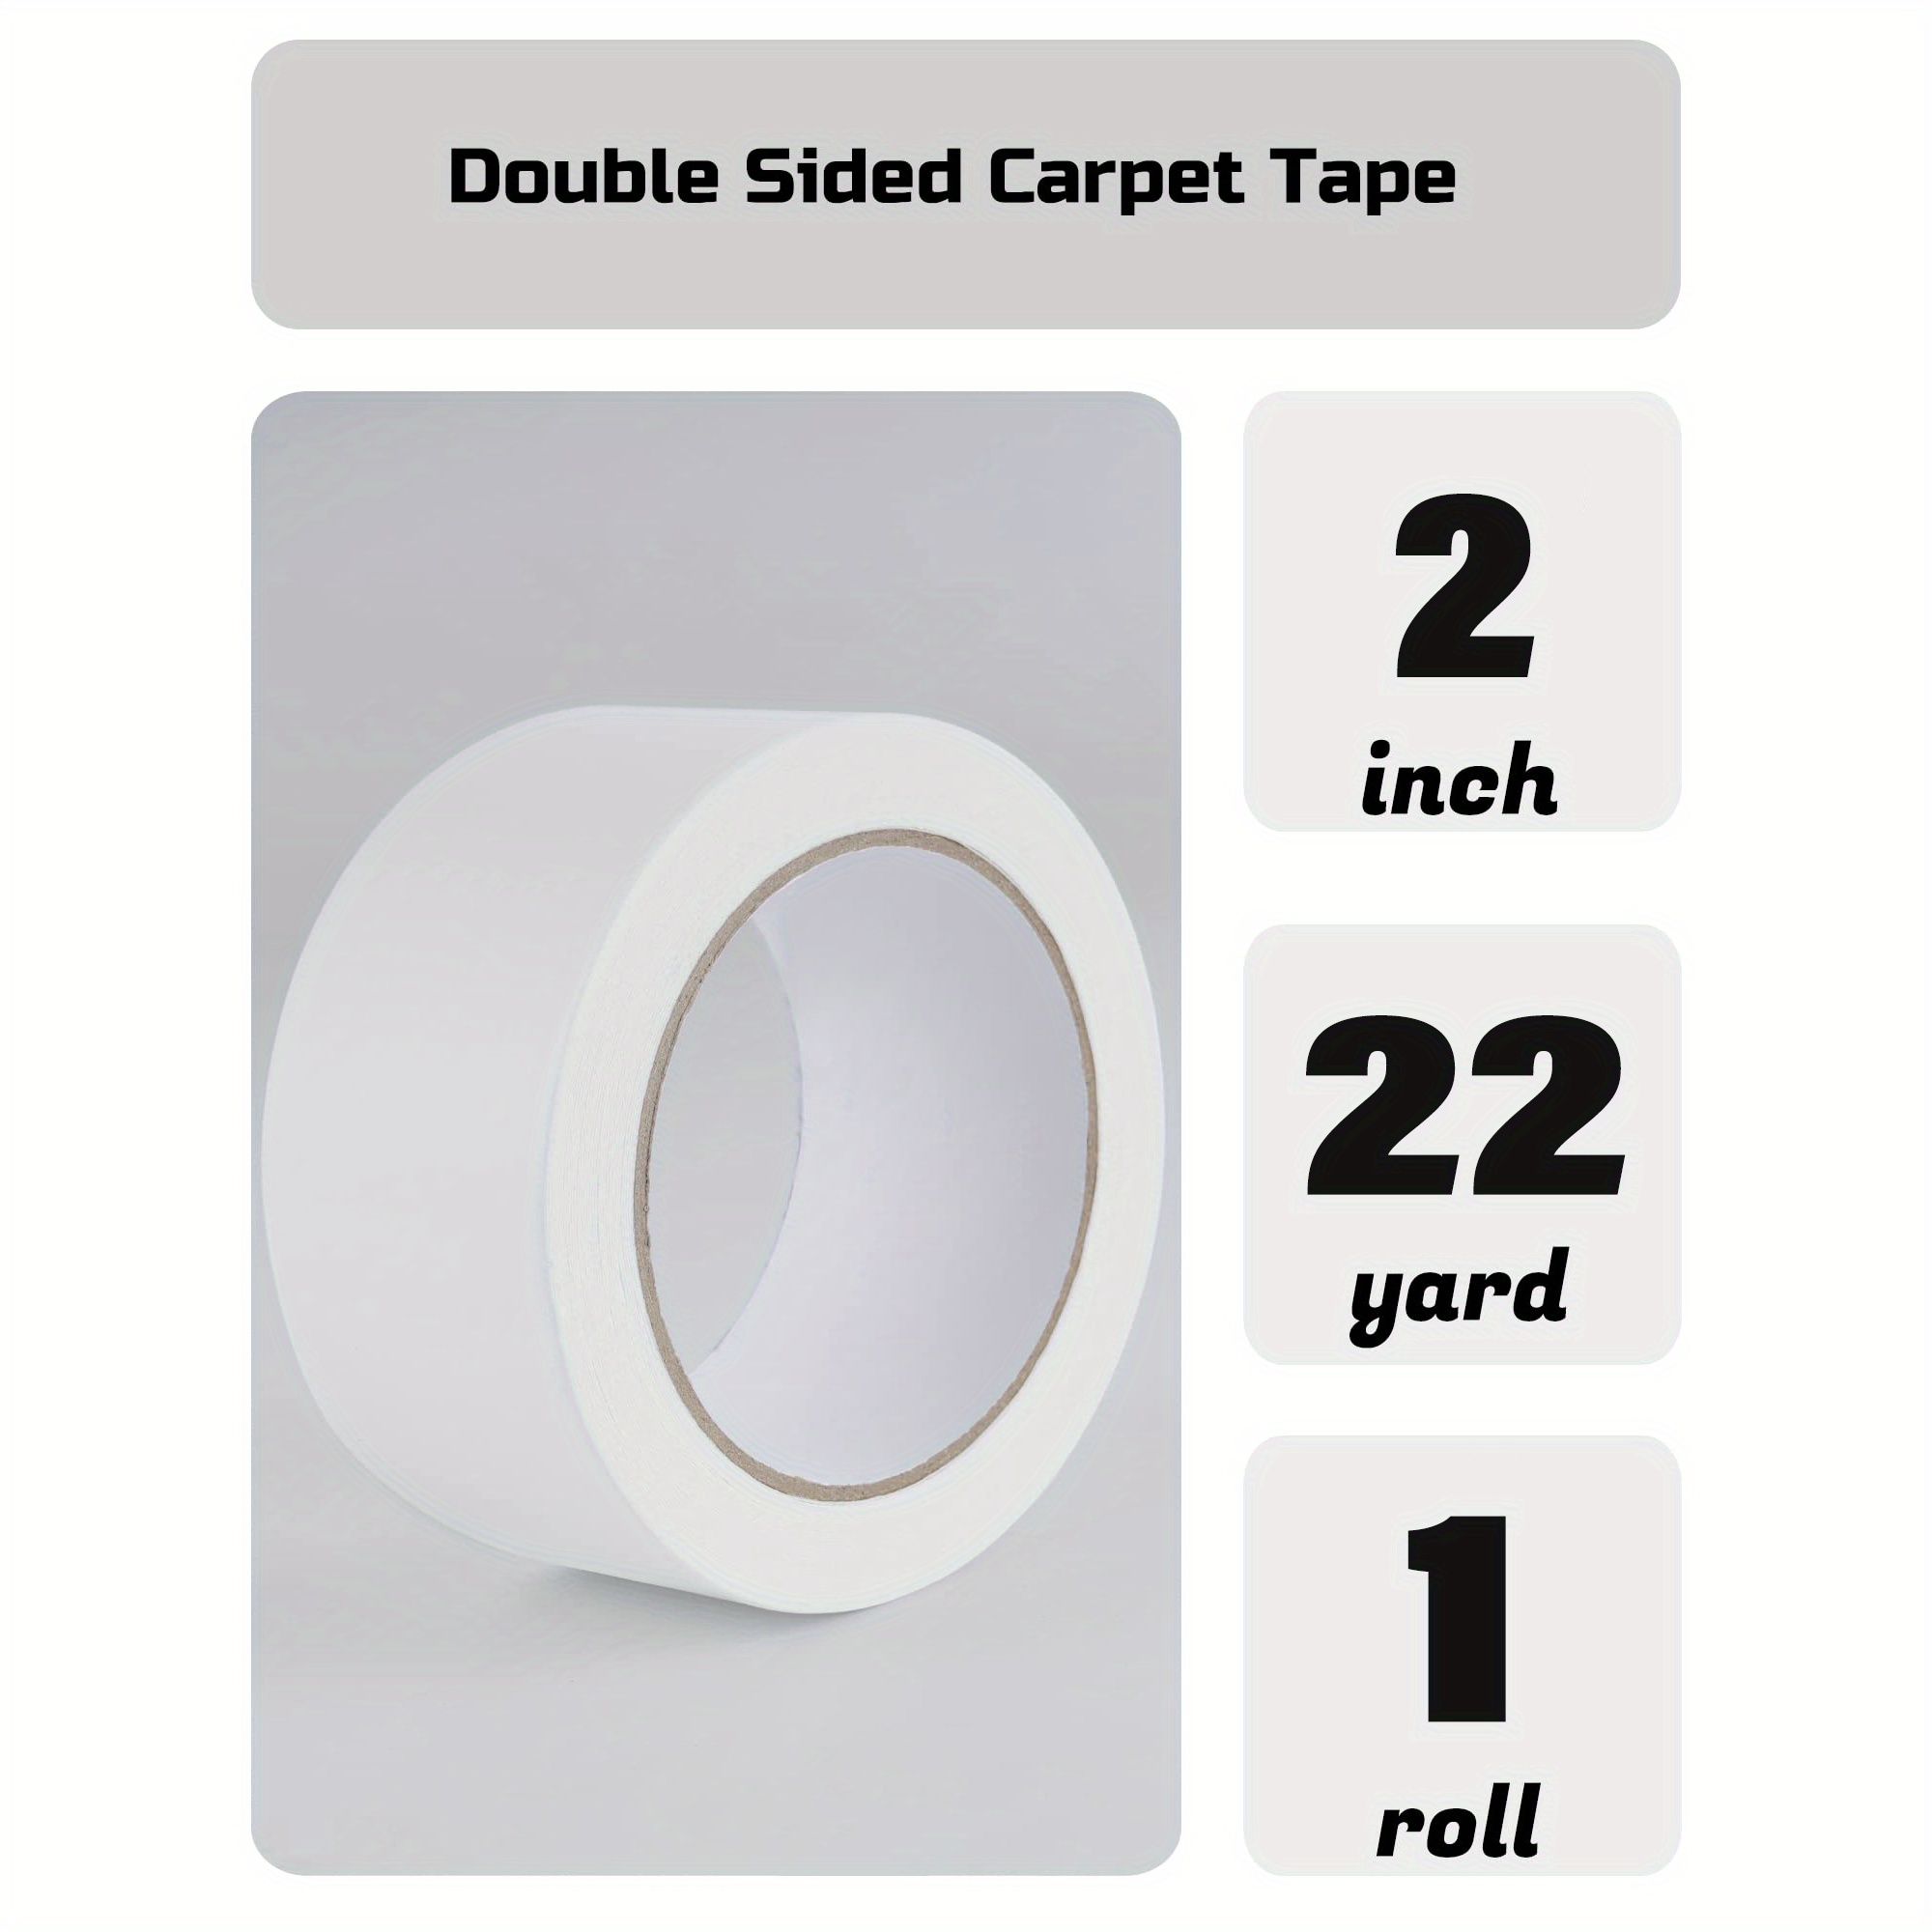 Juvale Heavy Duty Double Sided Tape For Carpet, Crafts, Hardwood, Tile,  Indoor, Outdoor Floors, 49 Feet : Target